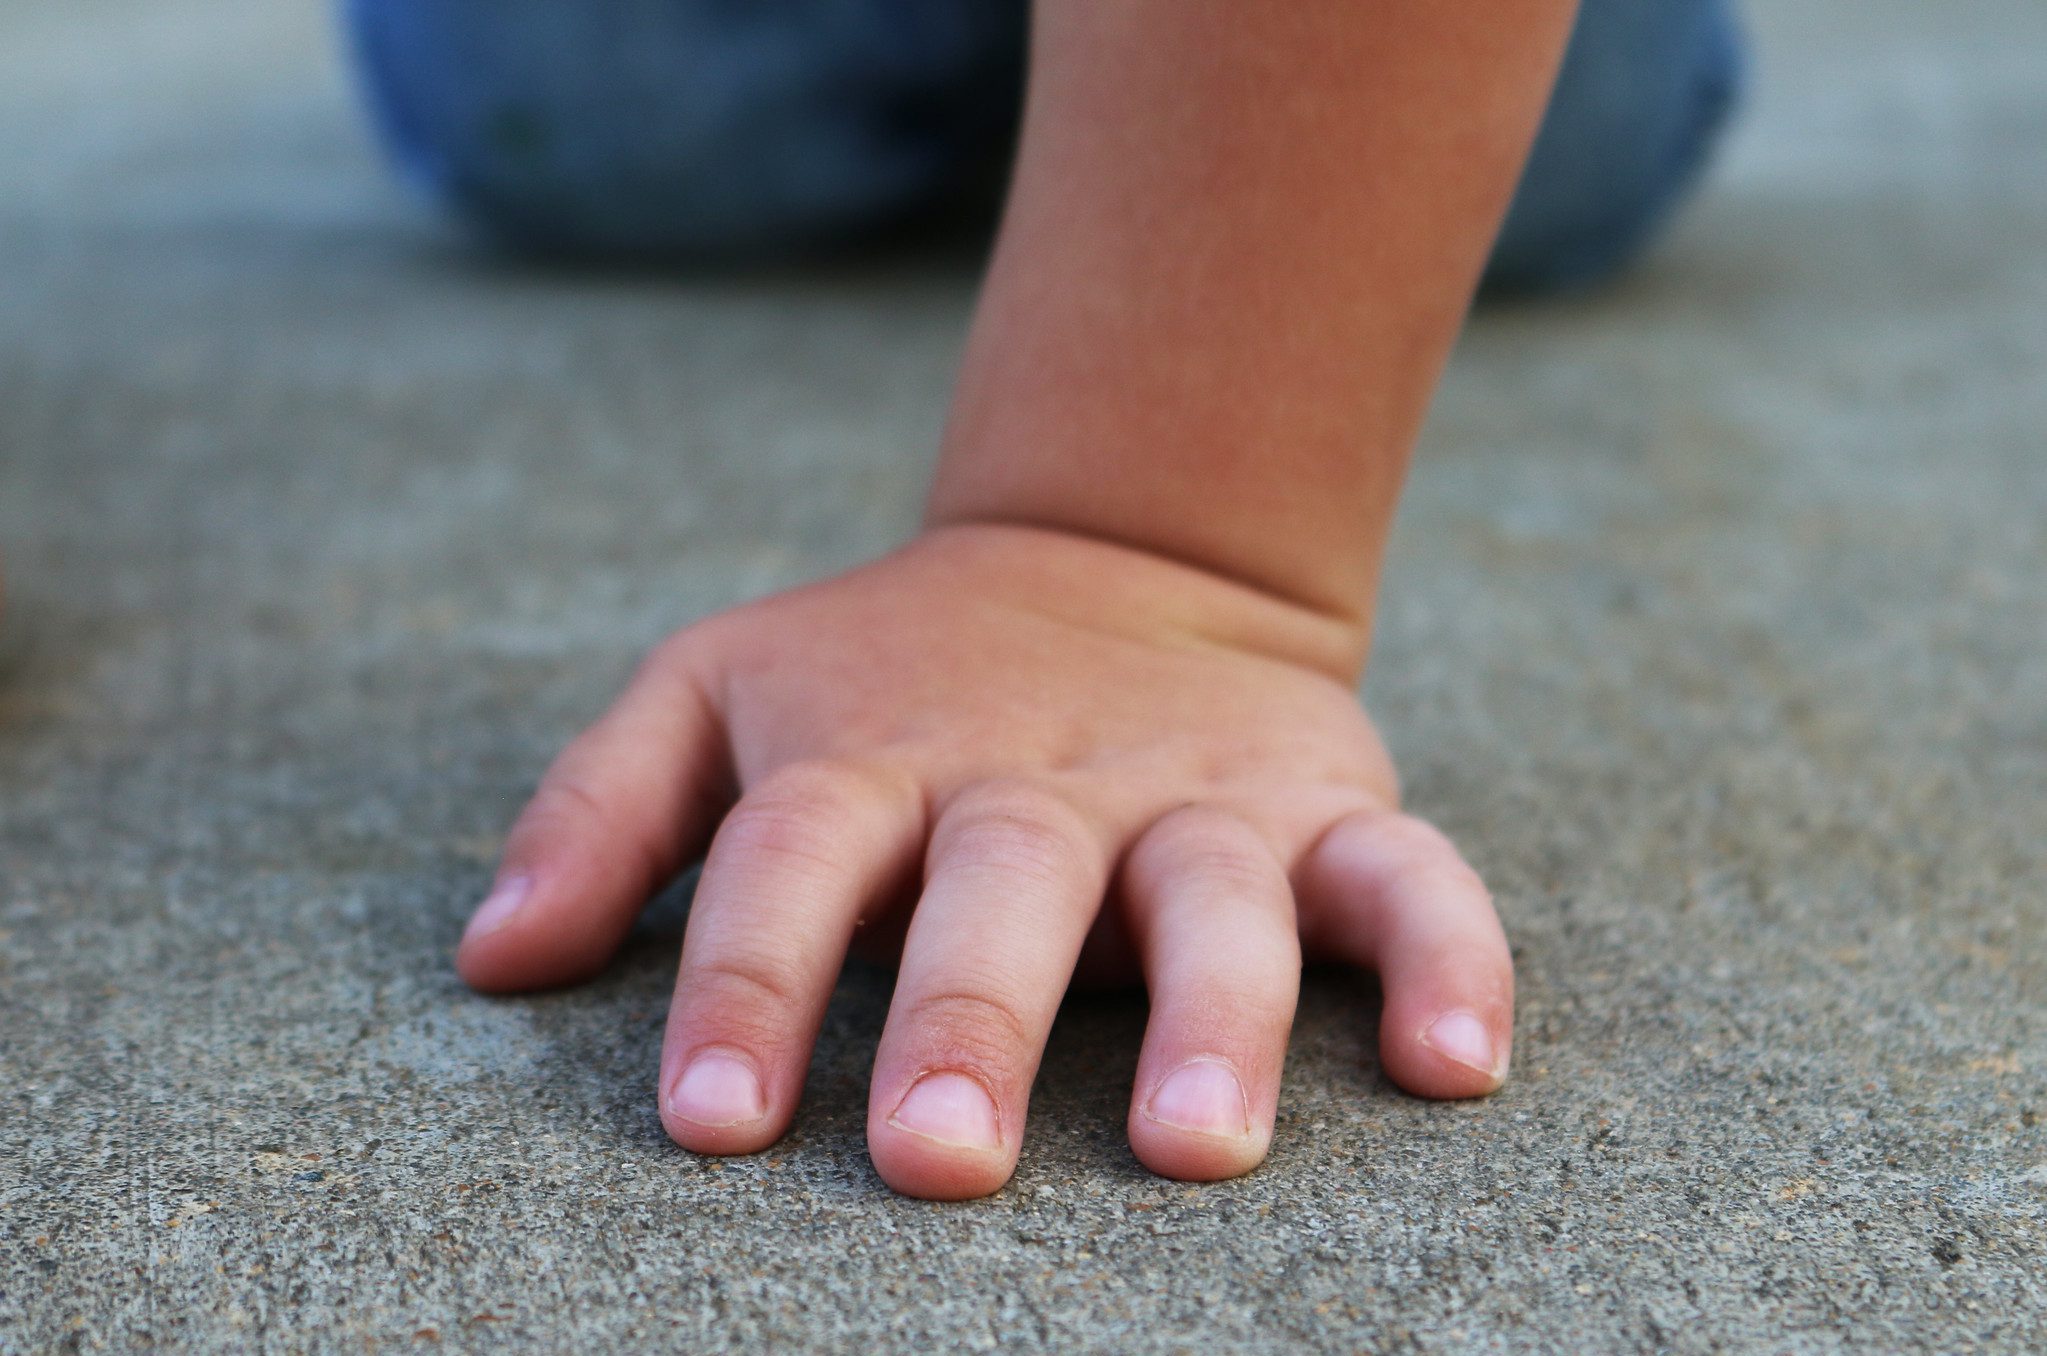 a child's hand on the concrete. child abuse prevention resources